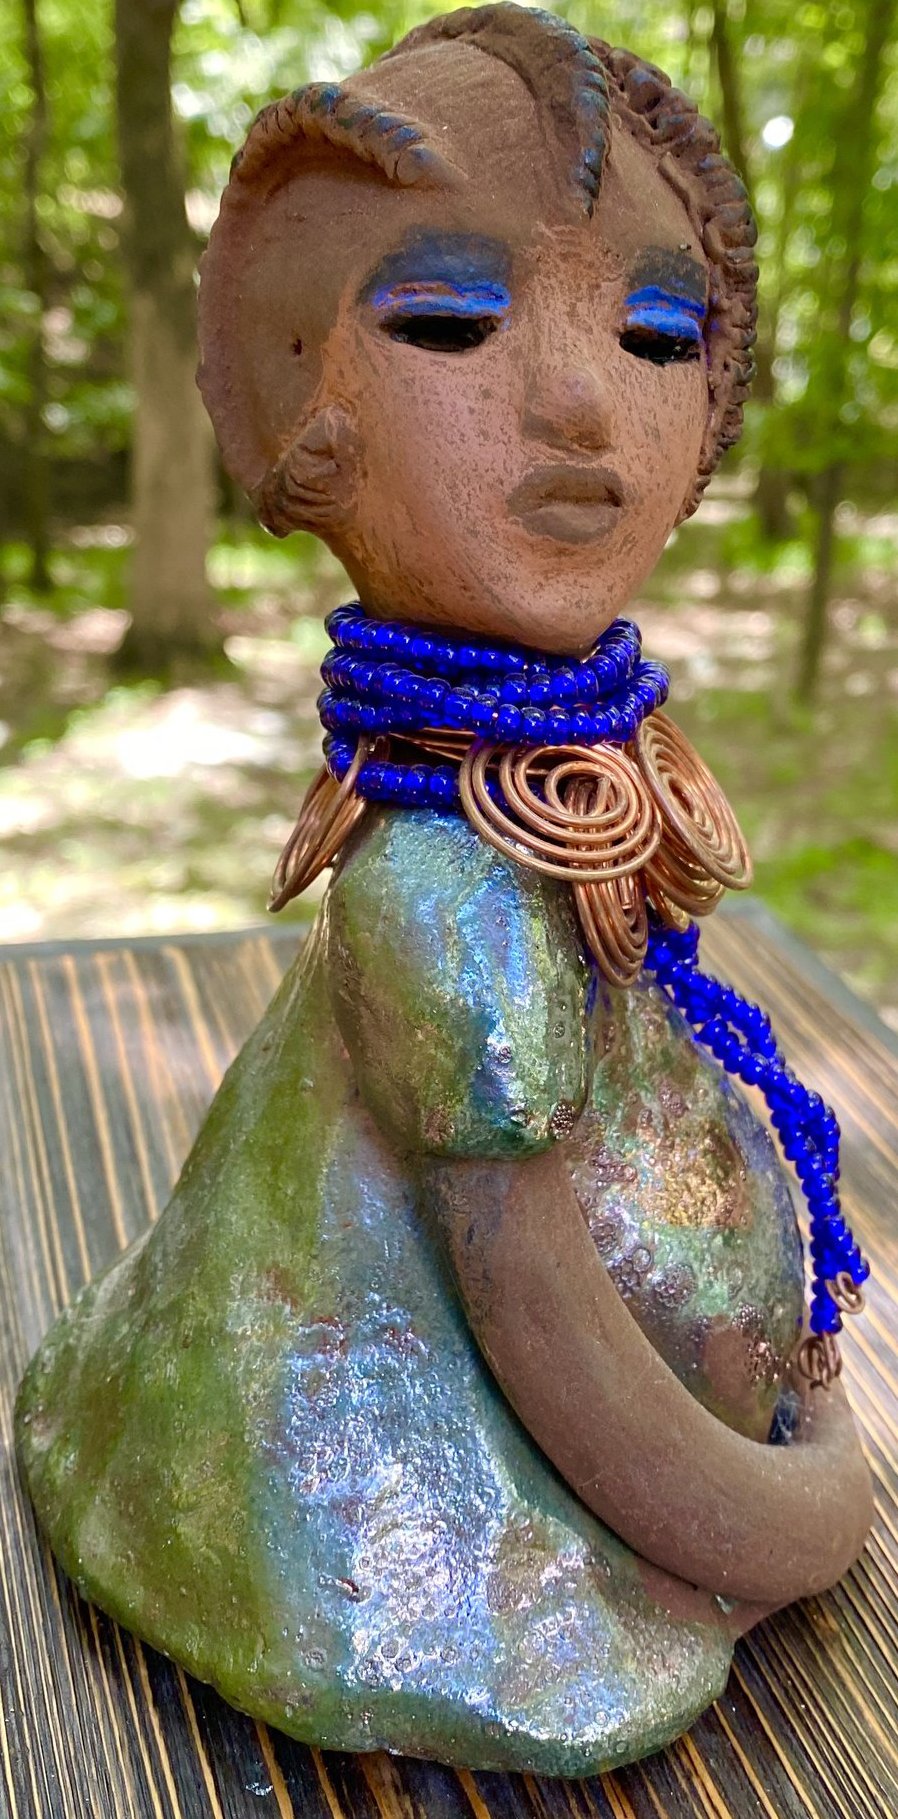 Meet  Ife! Ife stands 7.5" x 4" x 5" and weighs 1.02  lbs. She has a lovely honey brown complexion with reddish brown lips. She has a short braided hairstyle.  Ife has a colorful metallic antique copper glazed dress. She wears spiral copper wire necklaces on top of an aqua blue beaded collar. Ife long loving arms rest at her side. With accent blue eye shadow and eyes wide opened, Ife has hopes of finding a new home.